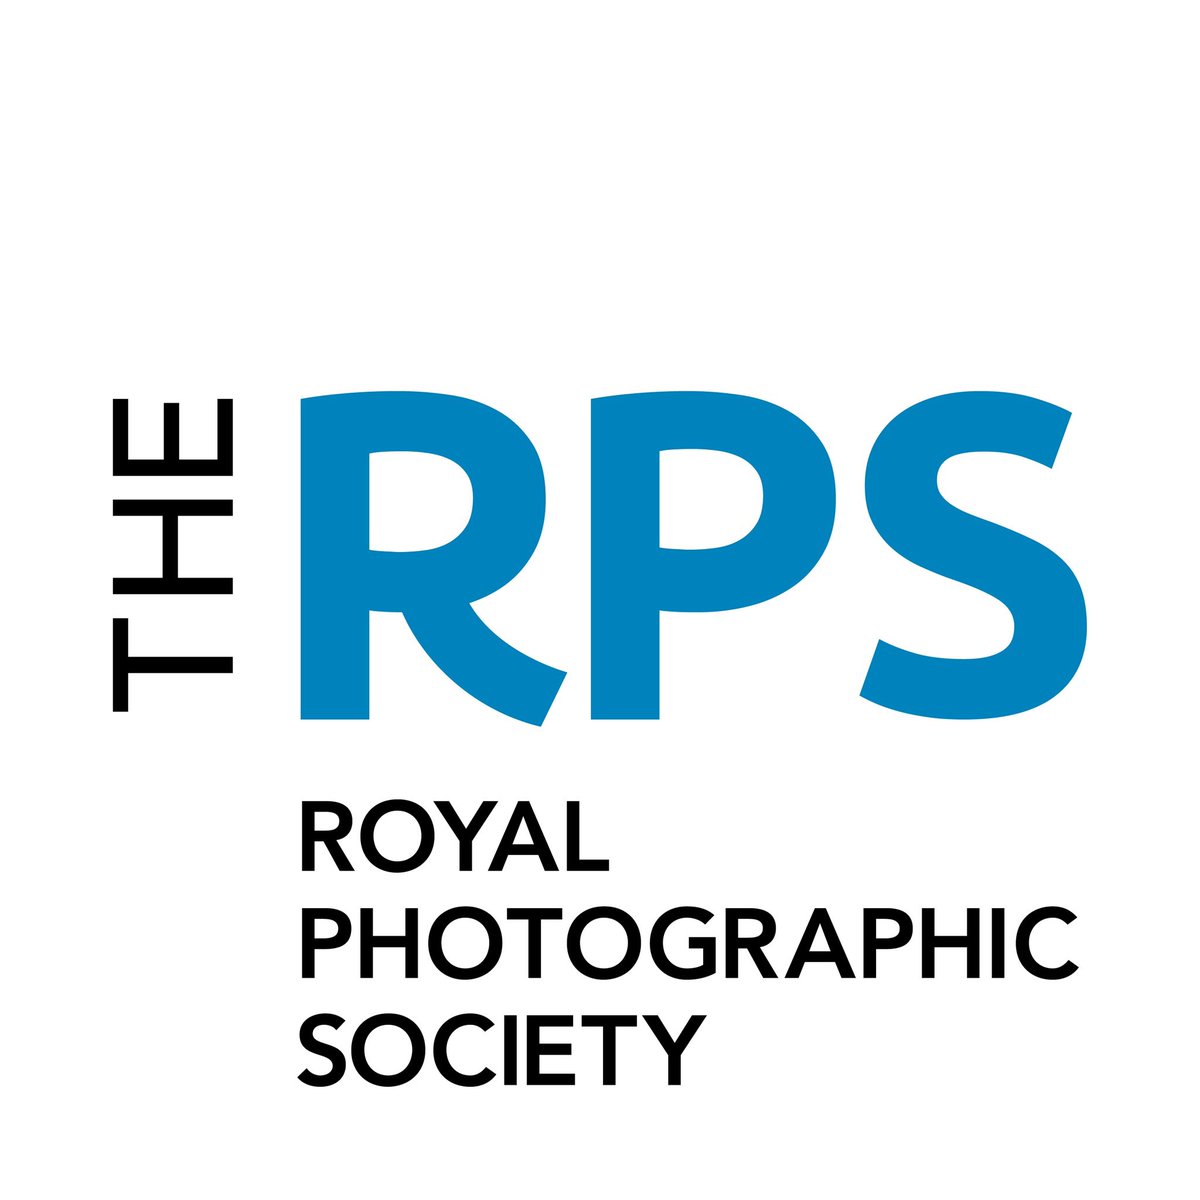 Pinching myself slightly to be one of the photographers shortlisted for the Royal Photographic Society’s International Photography Exhibition ♥️ An absolute dream come true ♥️ Thanks so much to RPS for this incredible opportunity #ipe165 @The_RPS